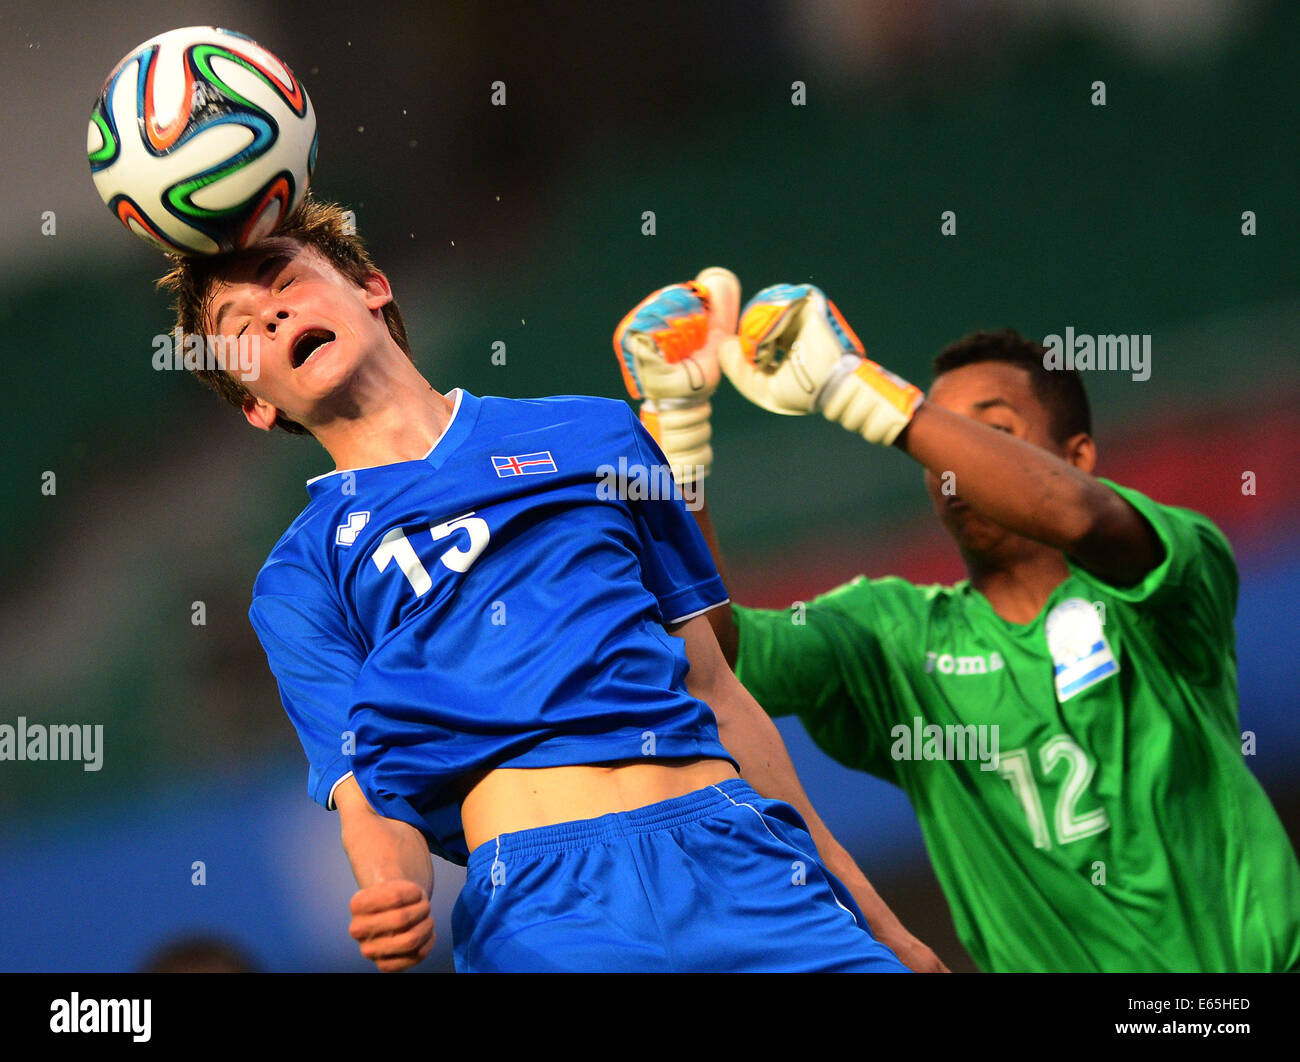 Nanjing, China's Jiangsu Province. 15th Aug, 2014. Gudmundur Andri Tryggvason (L) of Iceland heads the ball during the men's football game against Honduras in group C at Nanjing 2014 Youth Olympic Games in Nanjing, capital of east China's Jiangsu Province, on Aug. 15, 2014. Iceland wins the game 5:0. Credit:  Cheng Min/Xinhua/Alamy Live News Stock Photo